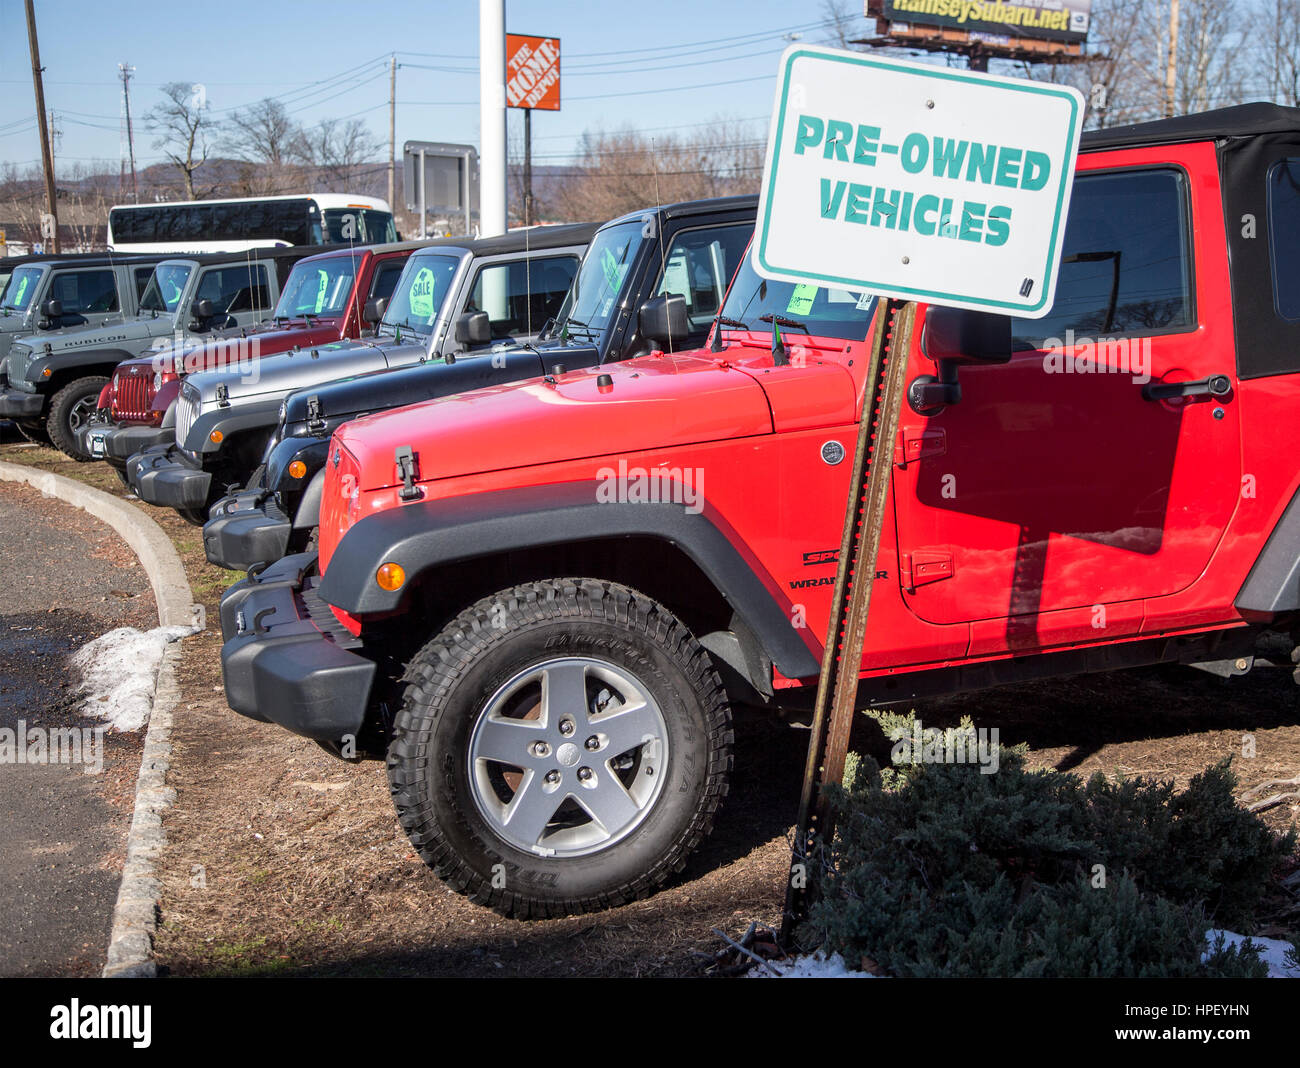 Cars for sale at a an automobile dealership in Ramsey, New Jersey Stock Photo